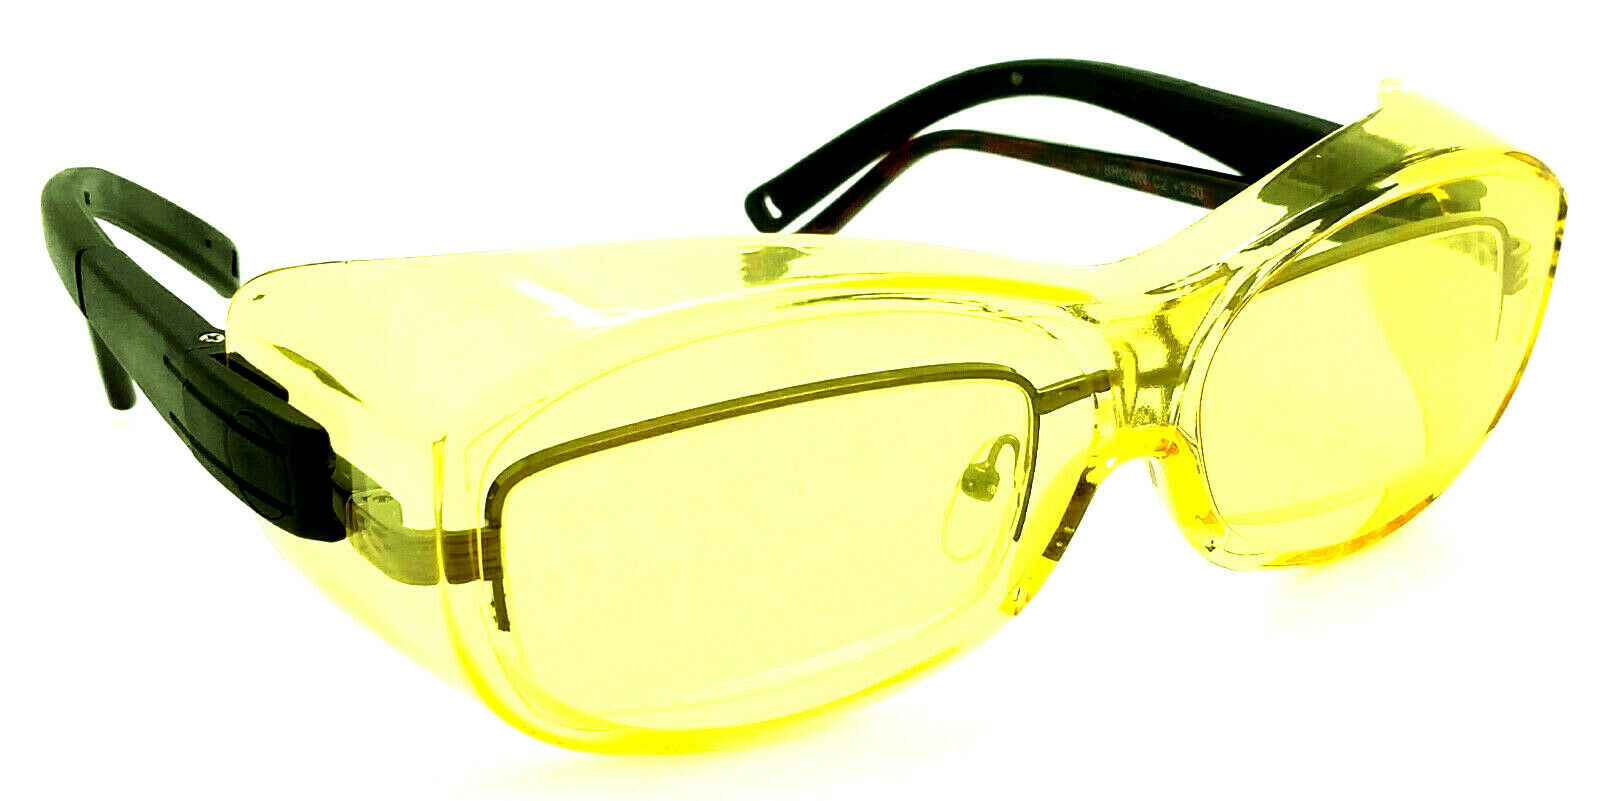 Shooter's Edge OTG Over-the-Glasse Z87.1 Safety Shooting Glasses Contrast Yellow